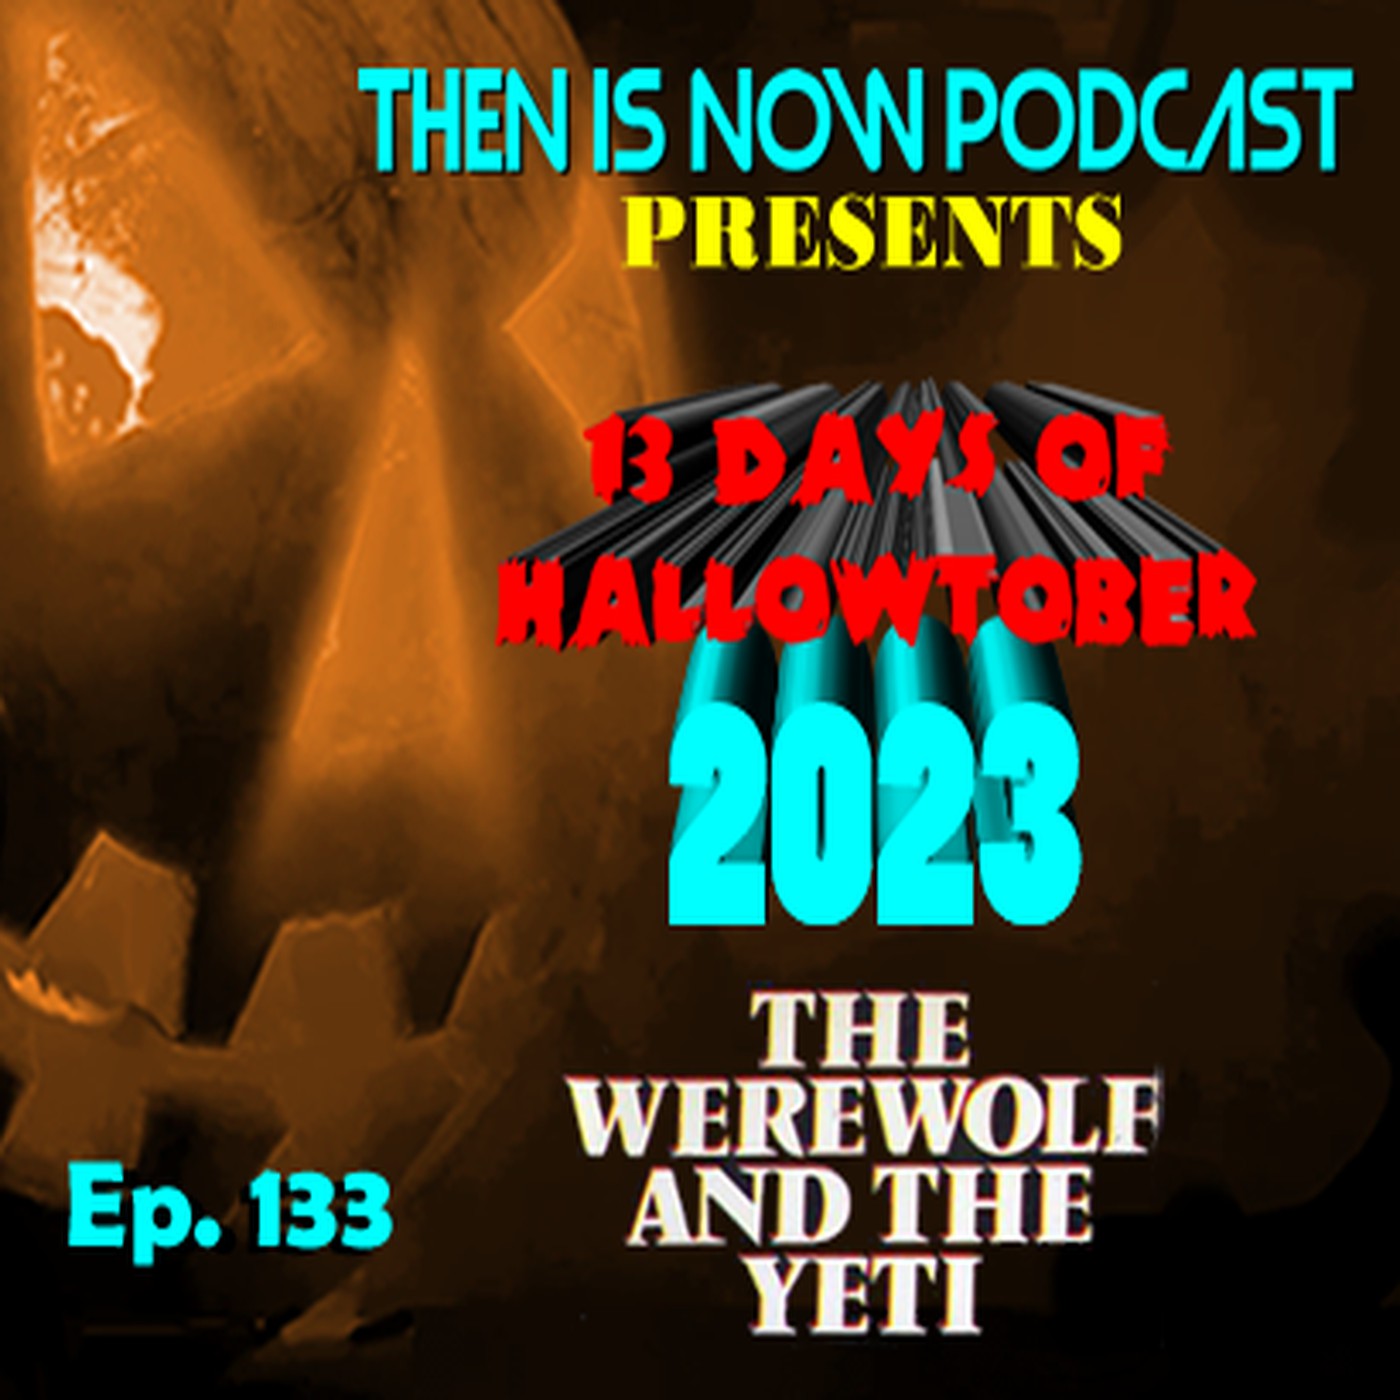 Then Is Now Ep. 133 - 13 Days of Hallowtober 2023 - Paul Naschy Films Part 2 with Rod Barnett